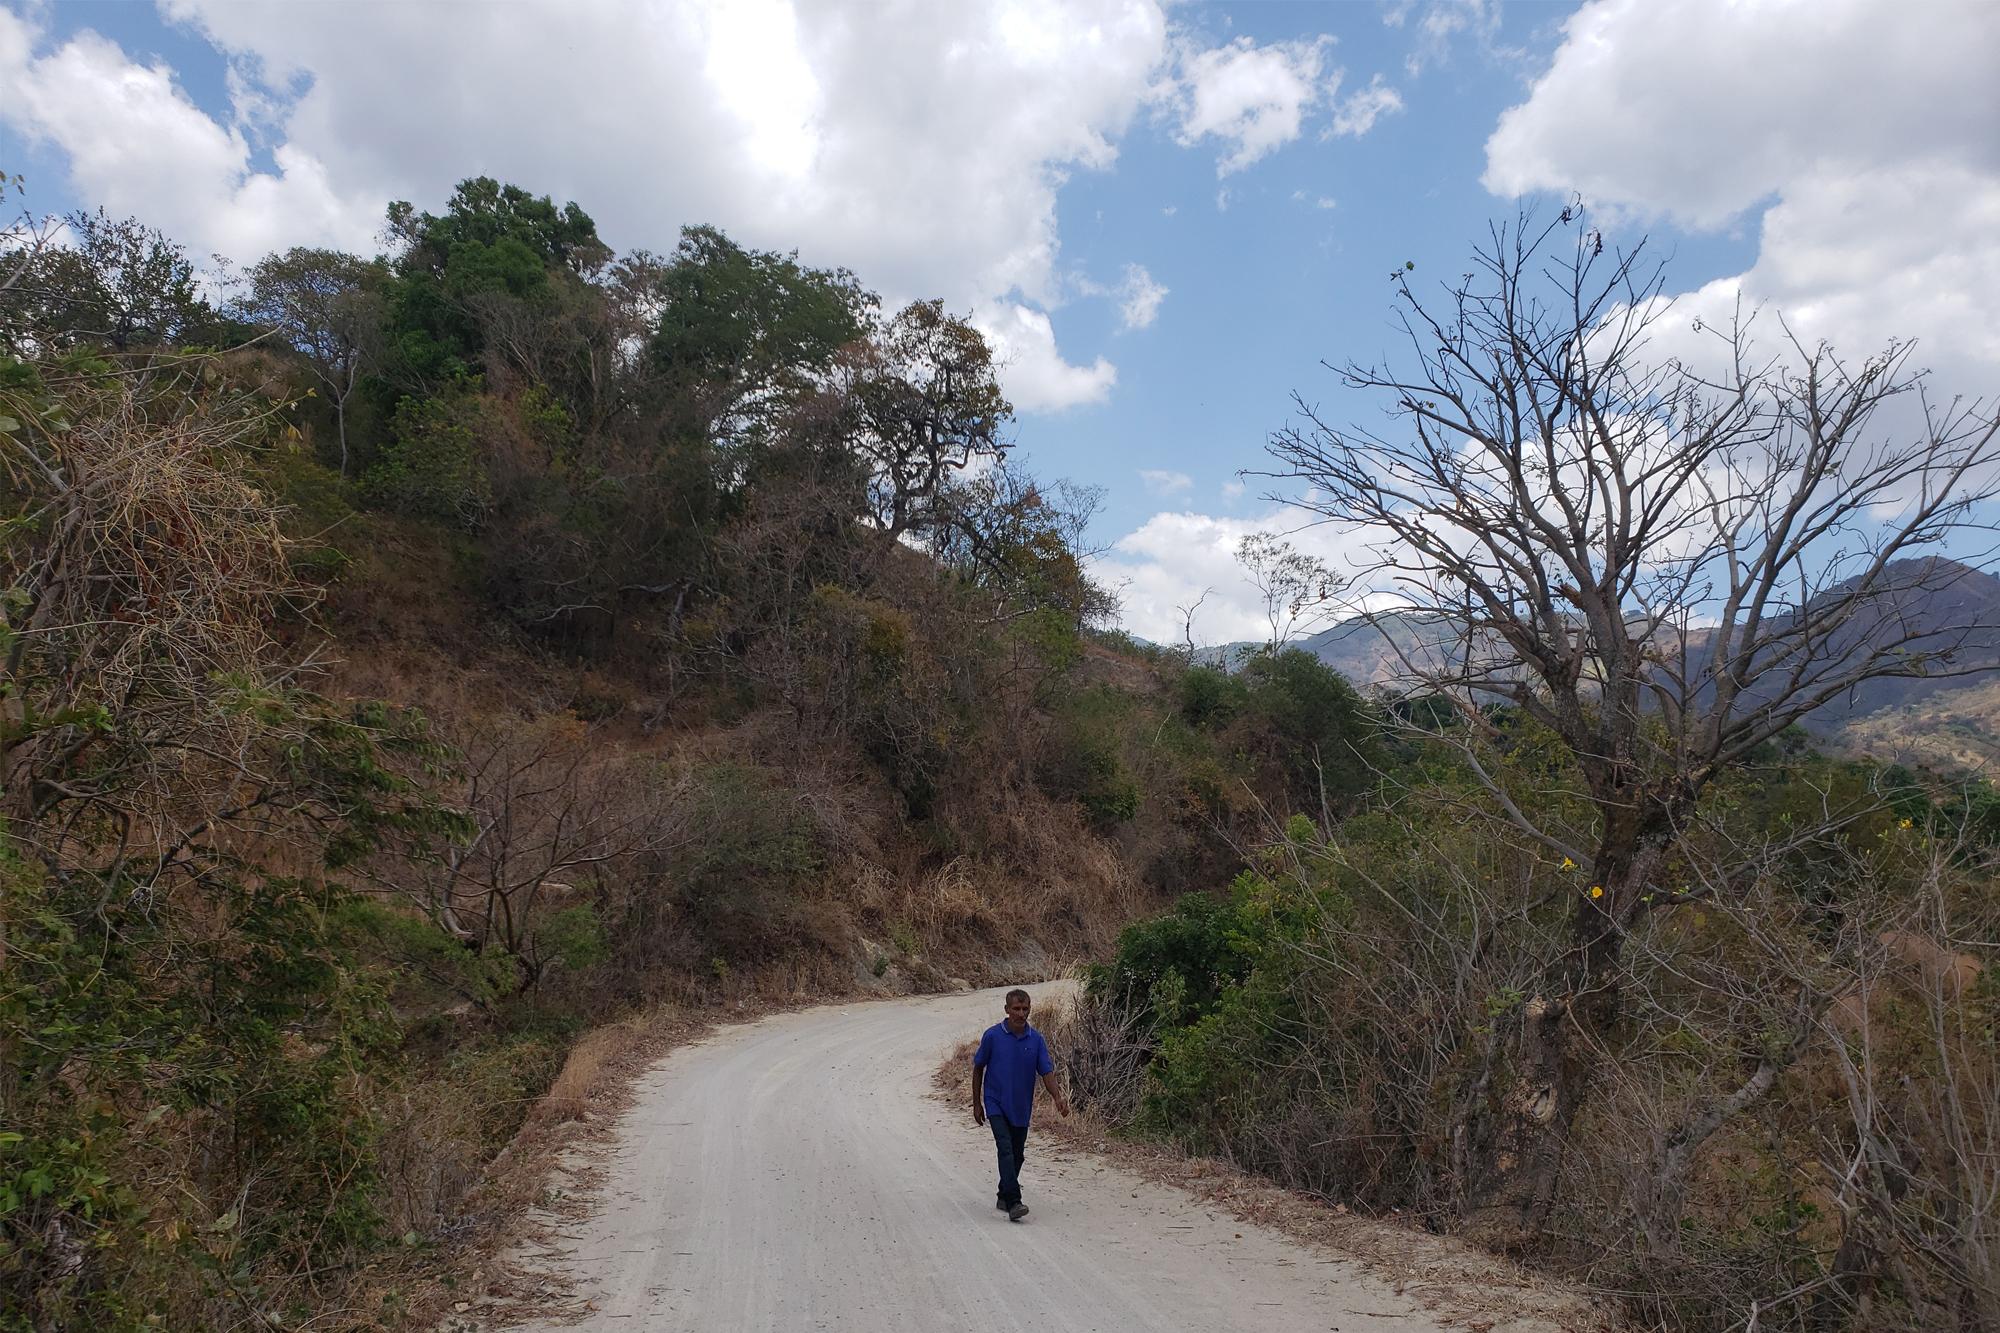 Roberto Calles, a 60-year-old campesino, walks toward Comalapa’s main highway. Roberto boasts that it only takes him thirty minutes to walk the roughly five kilometers of dirt road. “My boss took me to a race in Chalatenango, and I competed against kids in their 20s and finished in fourth place,” he says. Photo for El Faro: Efren Lemus.